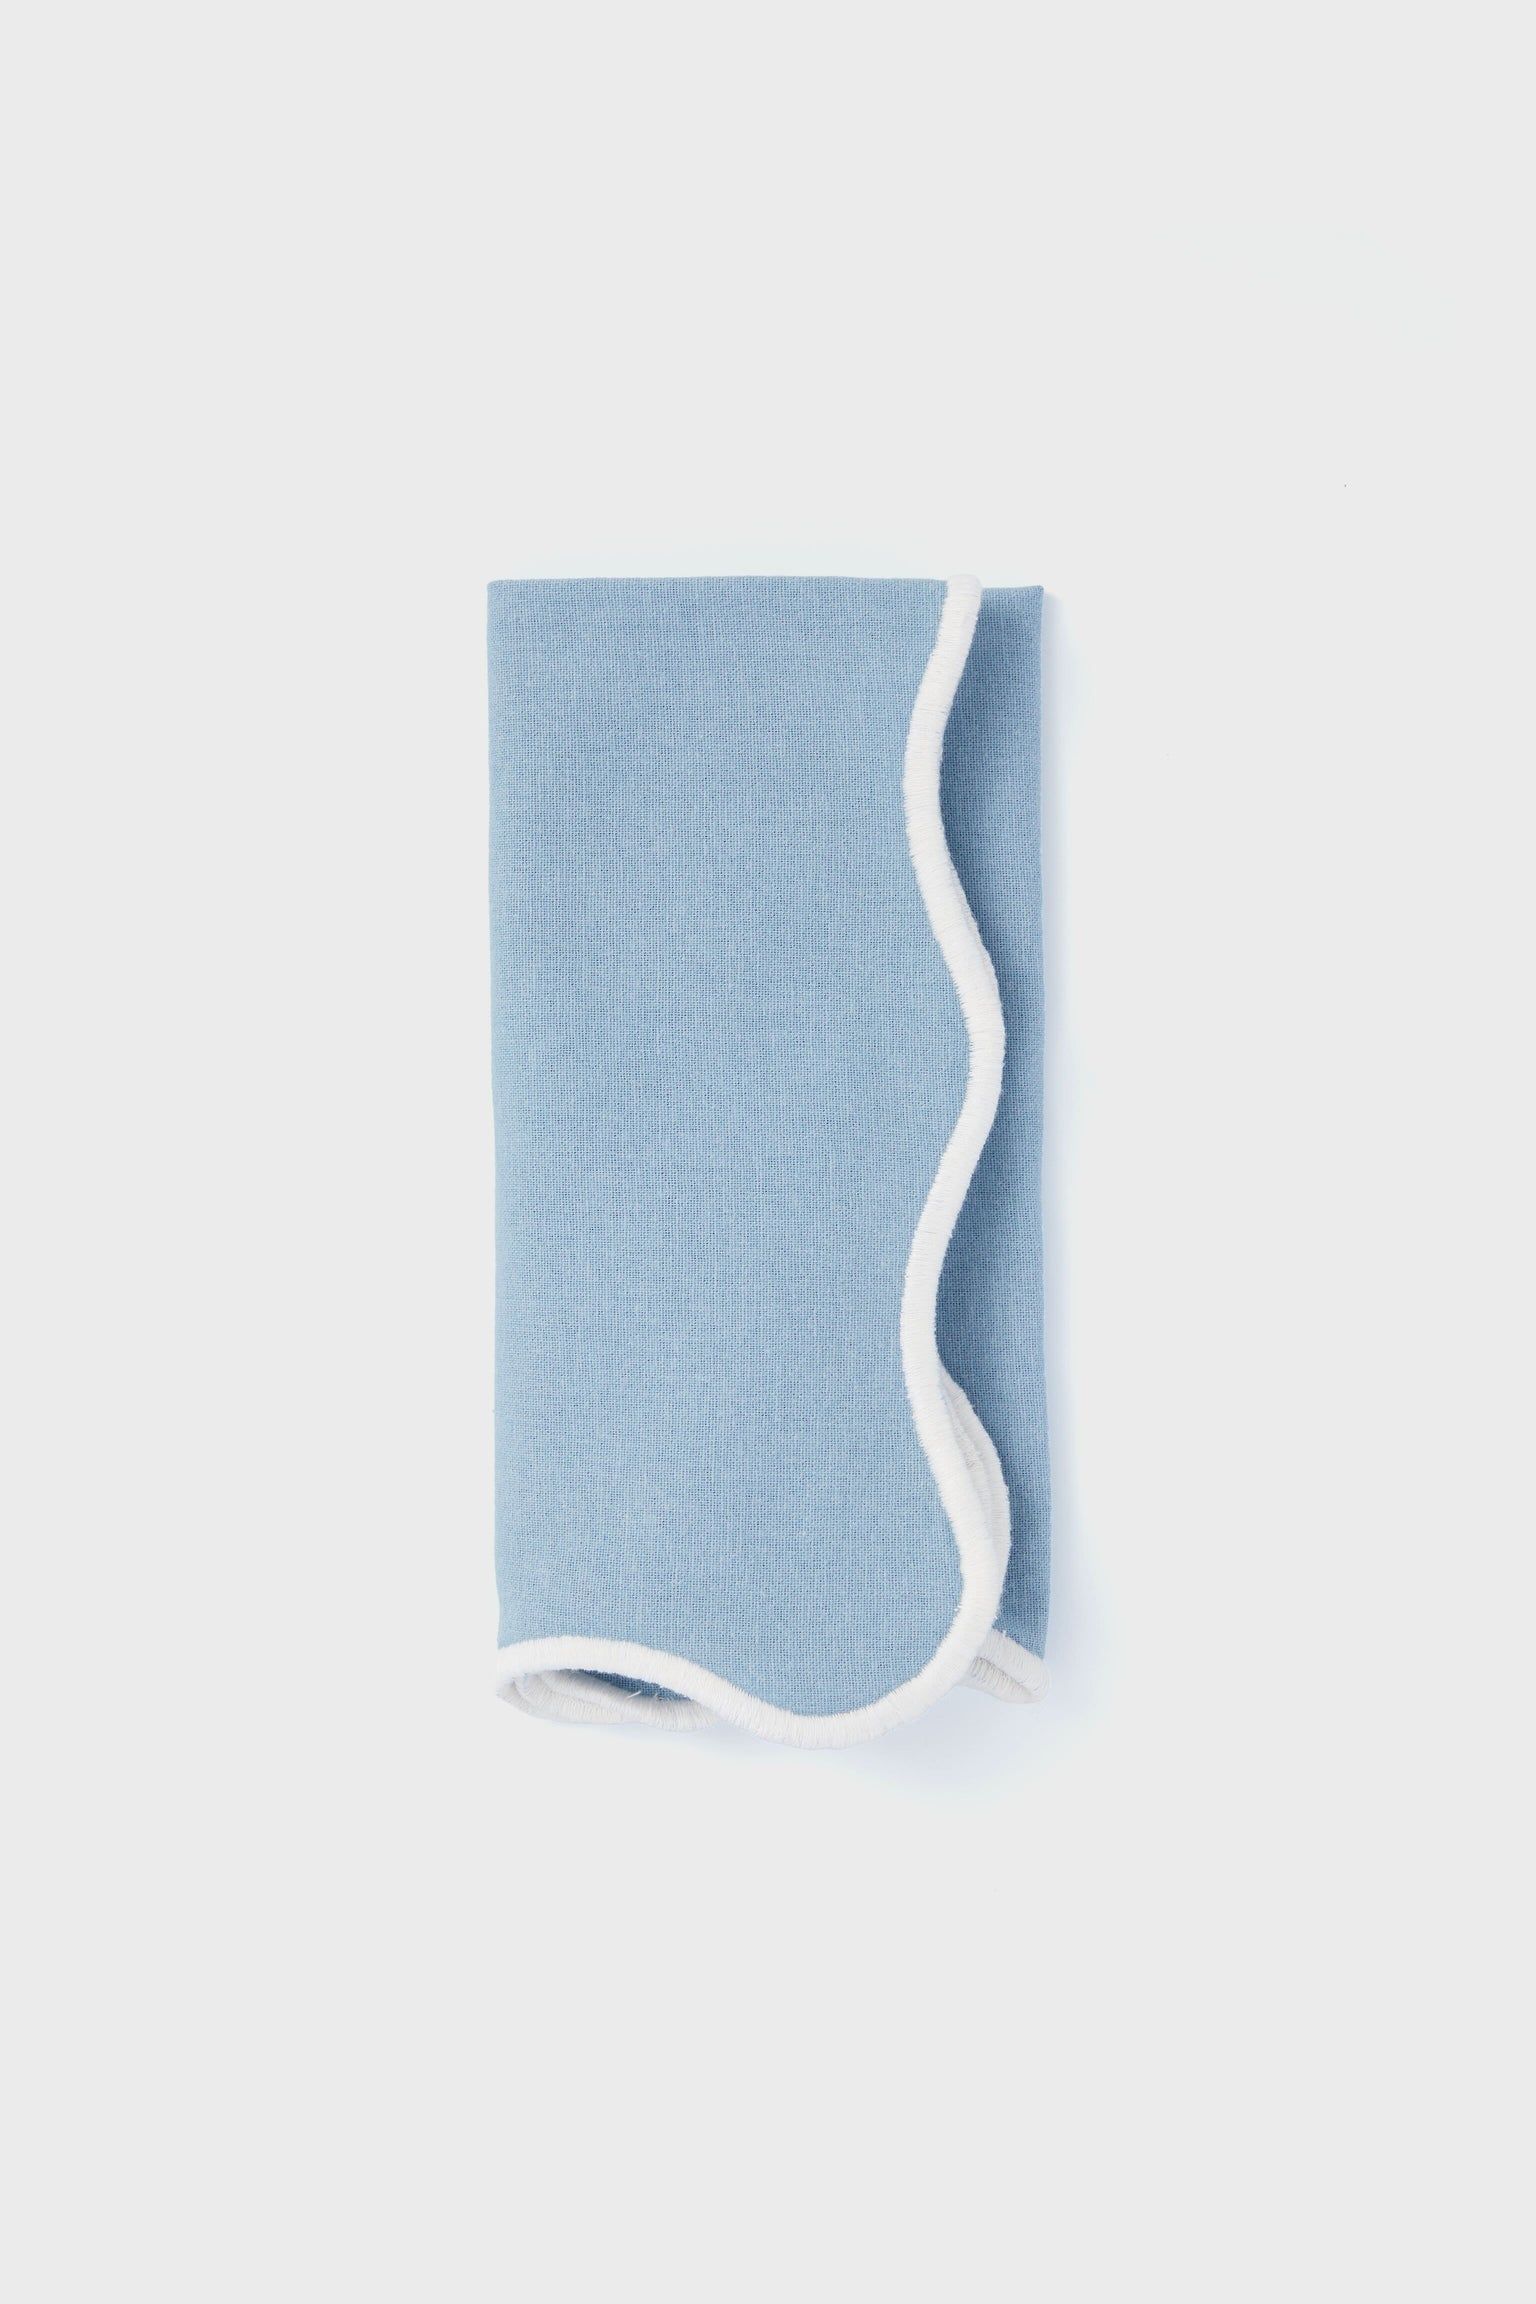 Dusty Blue and White Embroidered Scalloped Napkins Set of 4 | Tuckernuck (US)